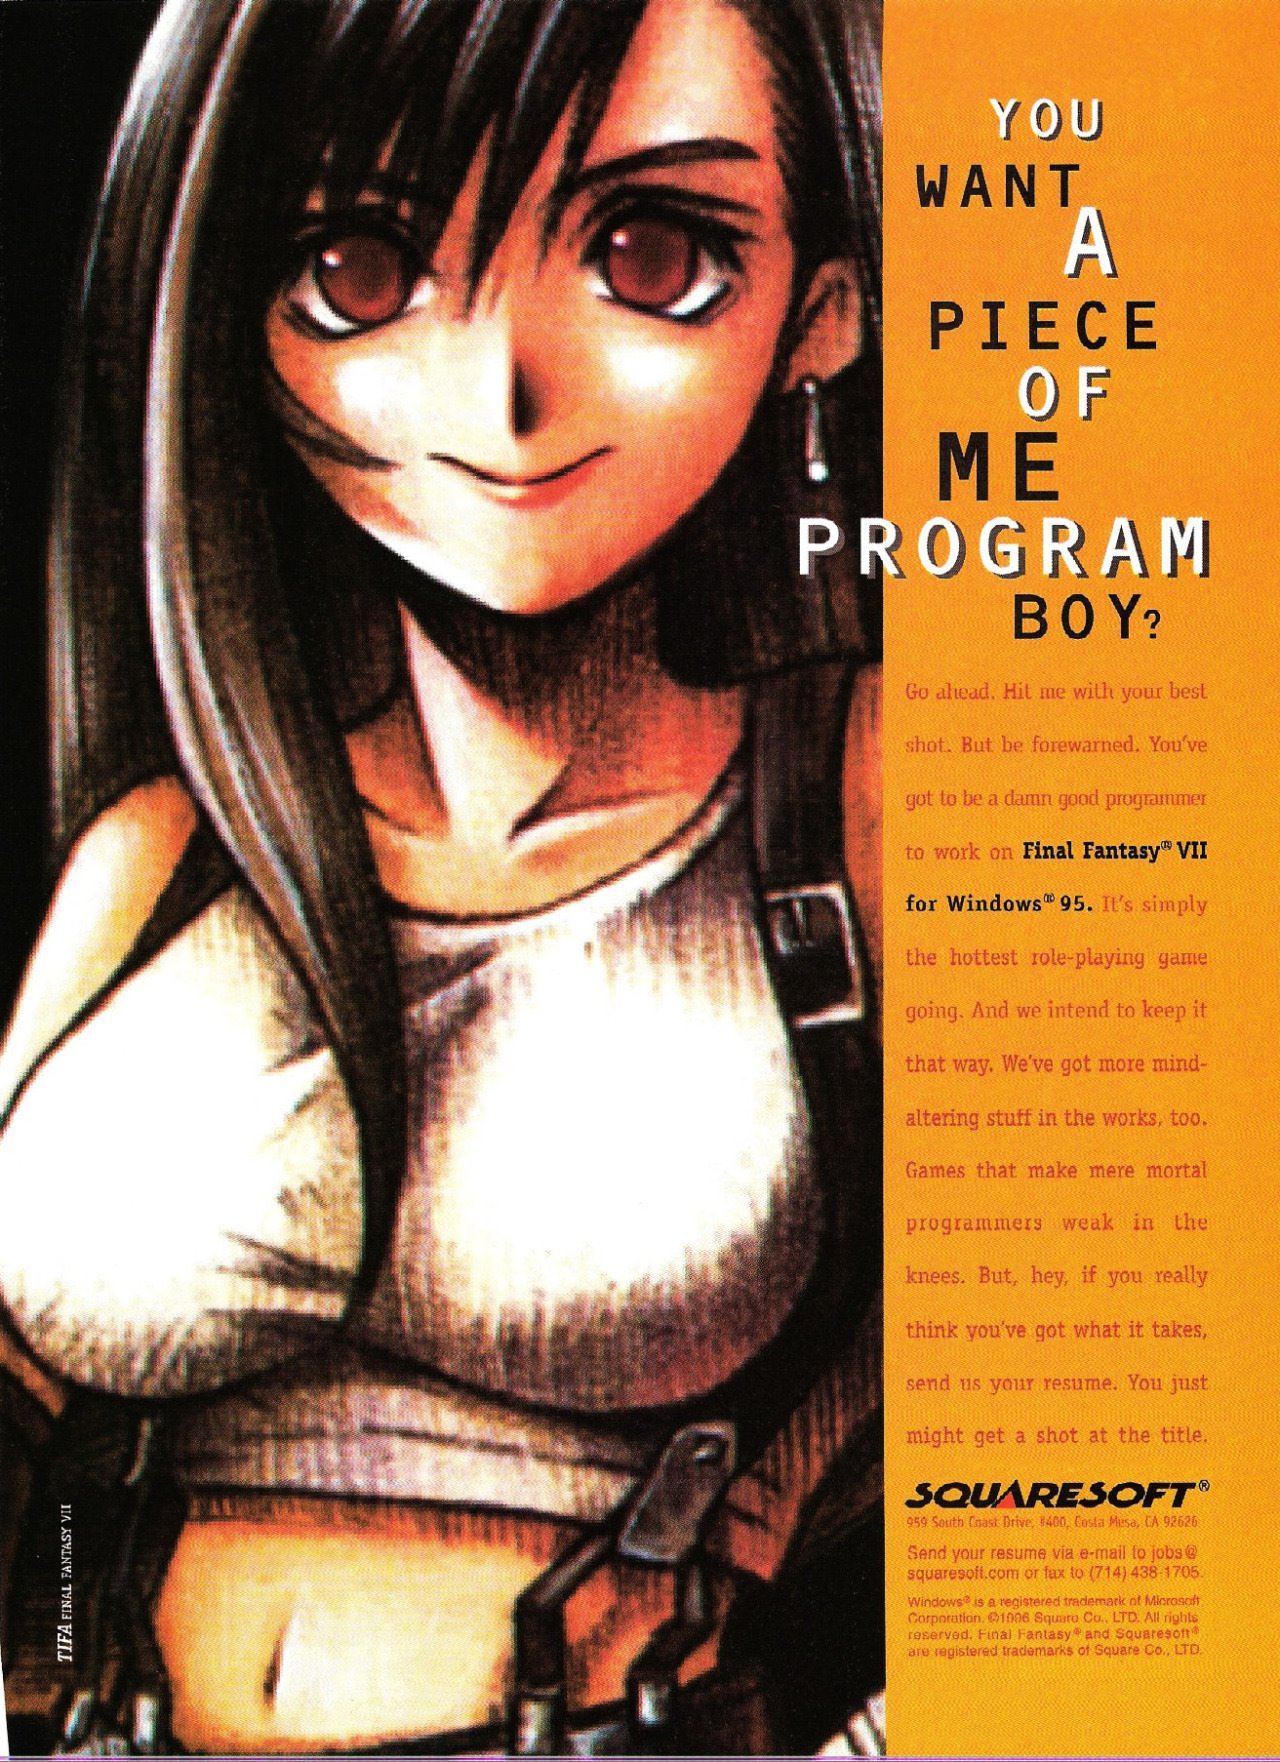 90s video game ads -  final fantasy vii pc port advertisement - Ta You Want A Piece Of Program Boy? siliani goni prapamam Final Fantasy Vii for Windows 95. It's ply And w That way we get me w athening munt the work a Bit des felly thine s'est t porn Tuju 